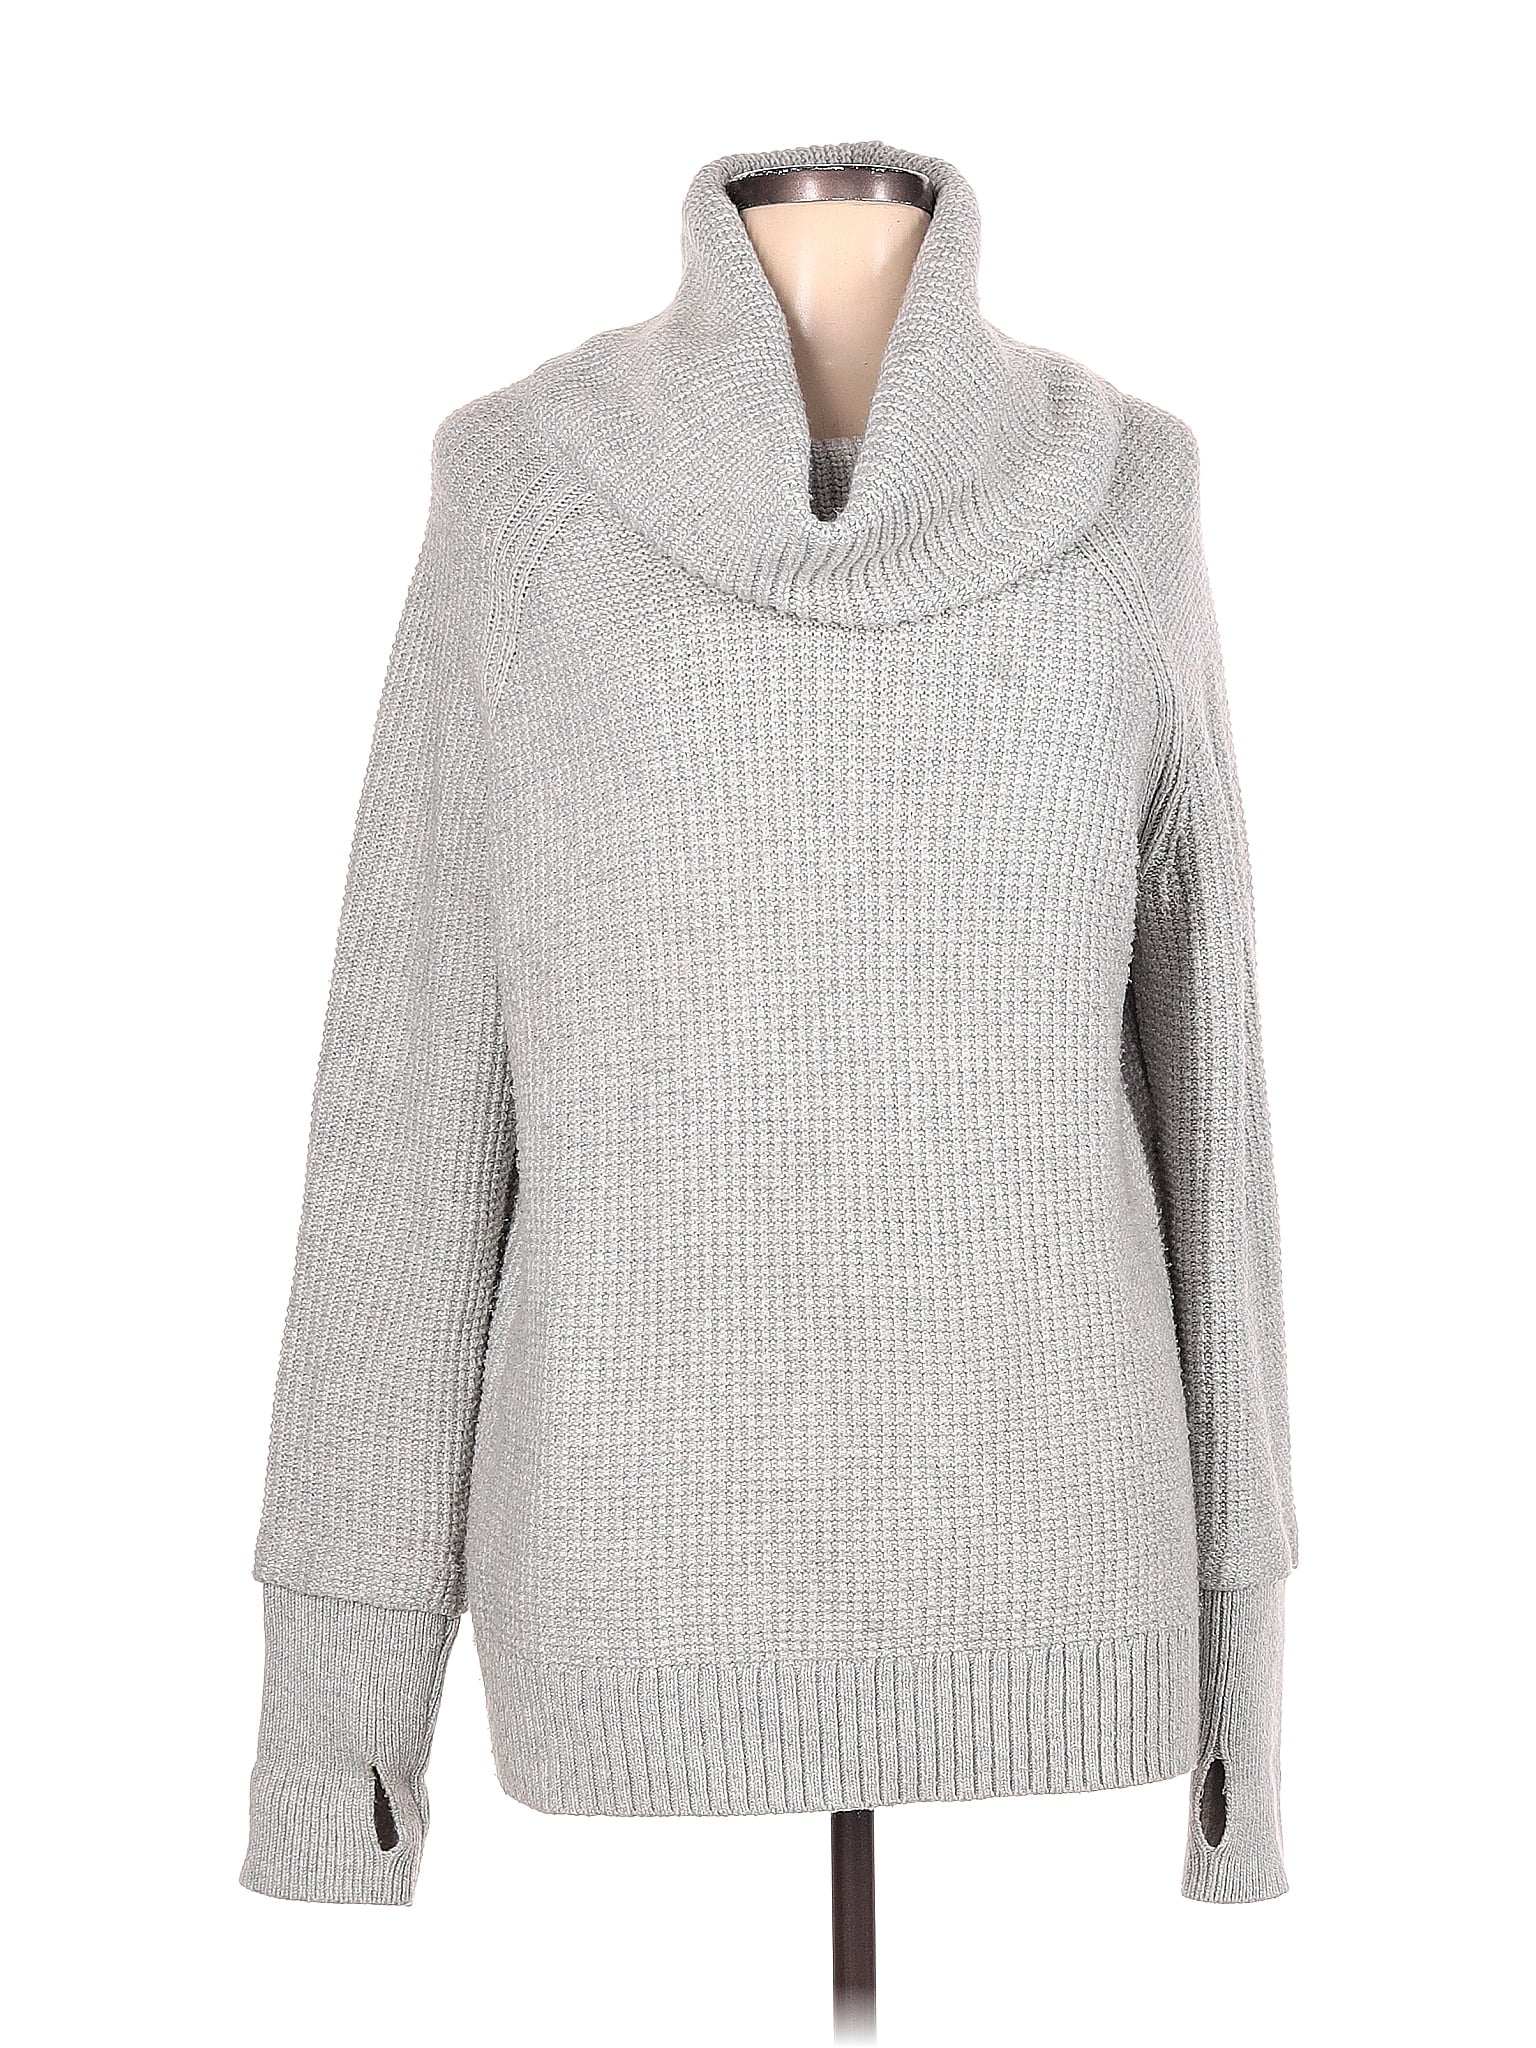 Market and Spruce Color Block Solid Gray Turtleneck Sweater Size L - 65 ...